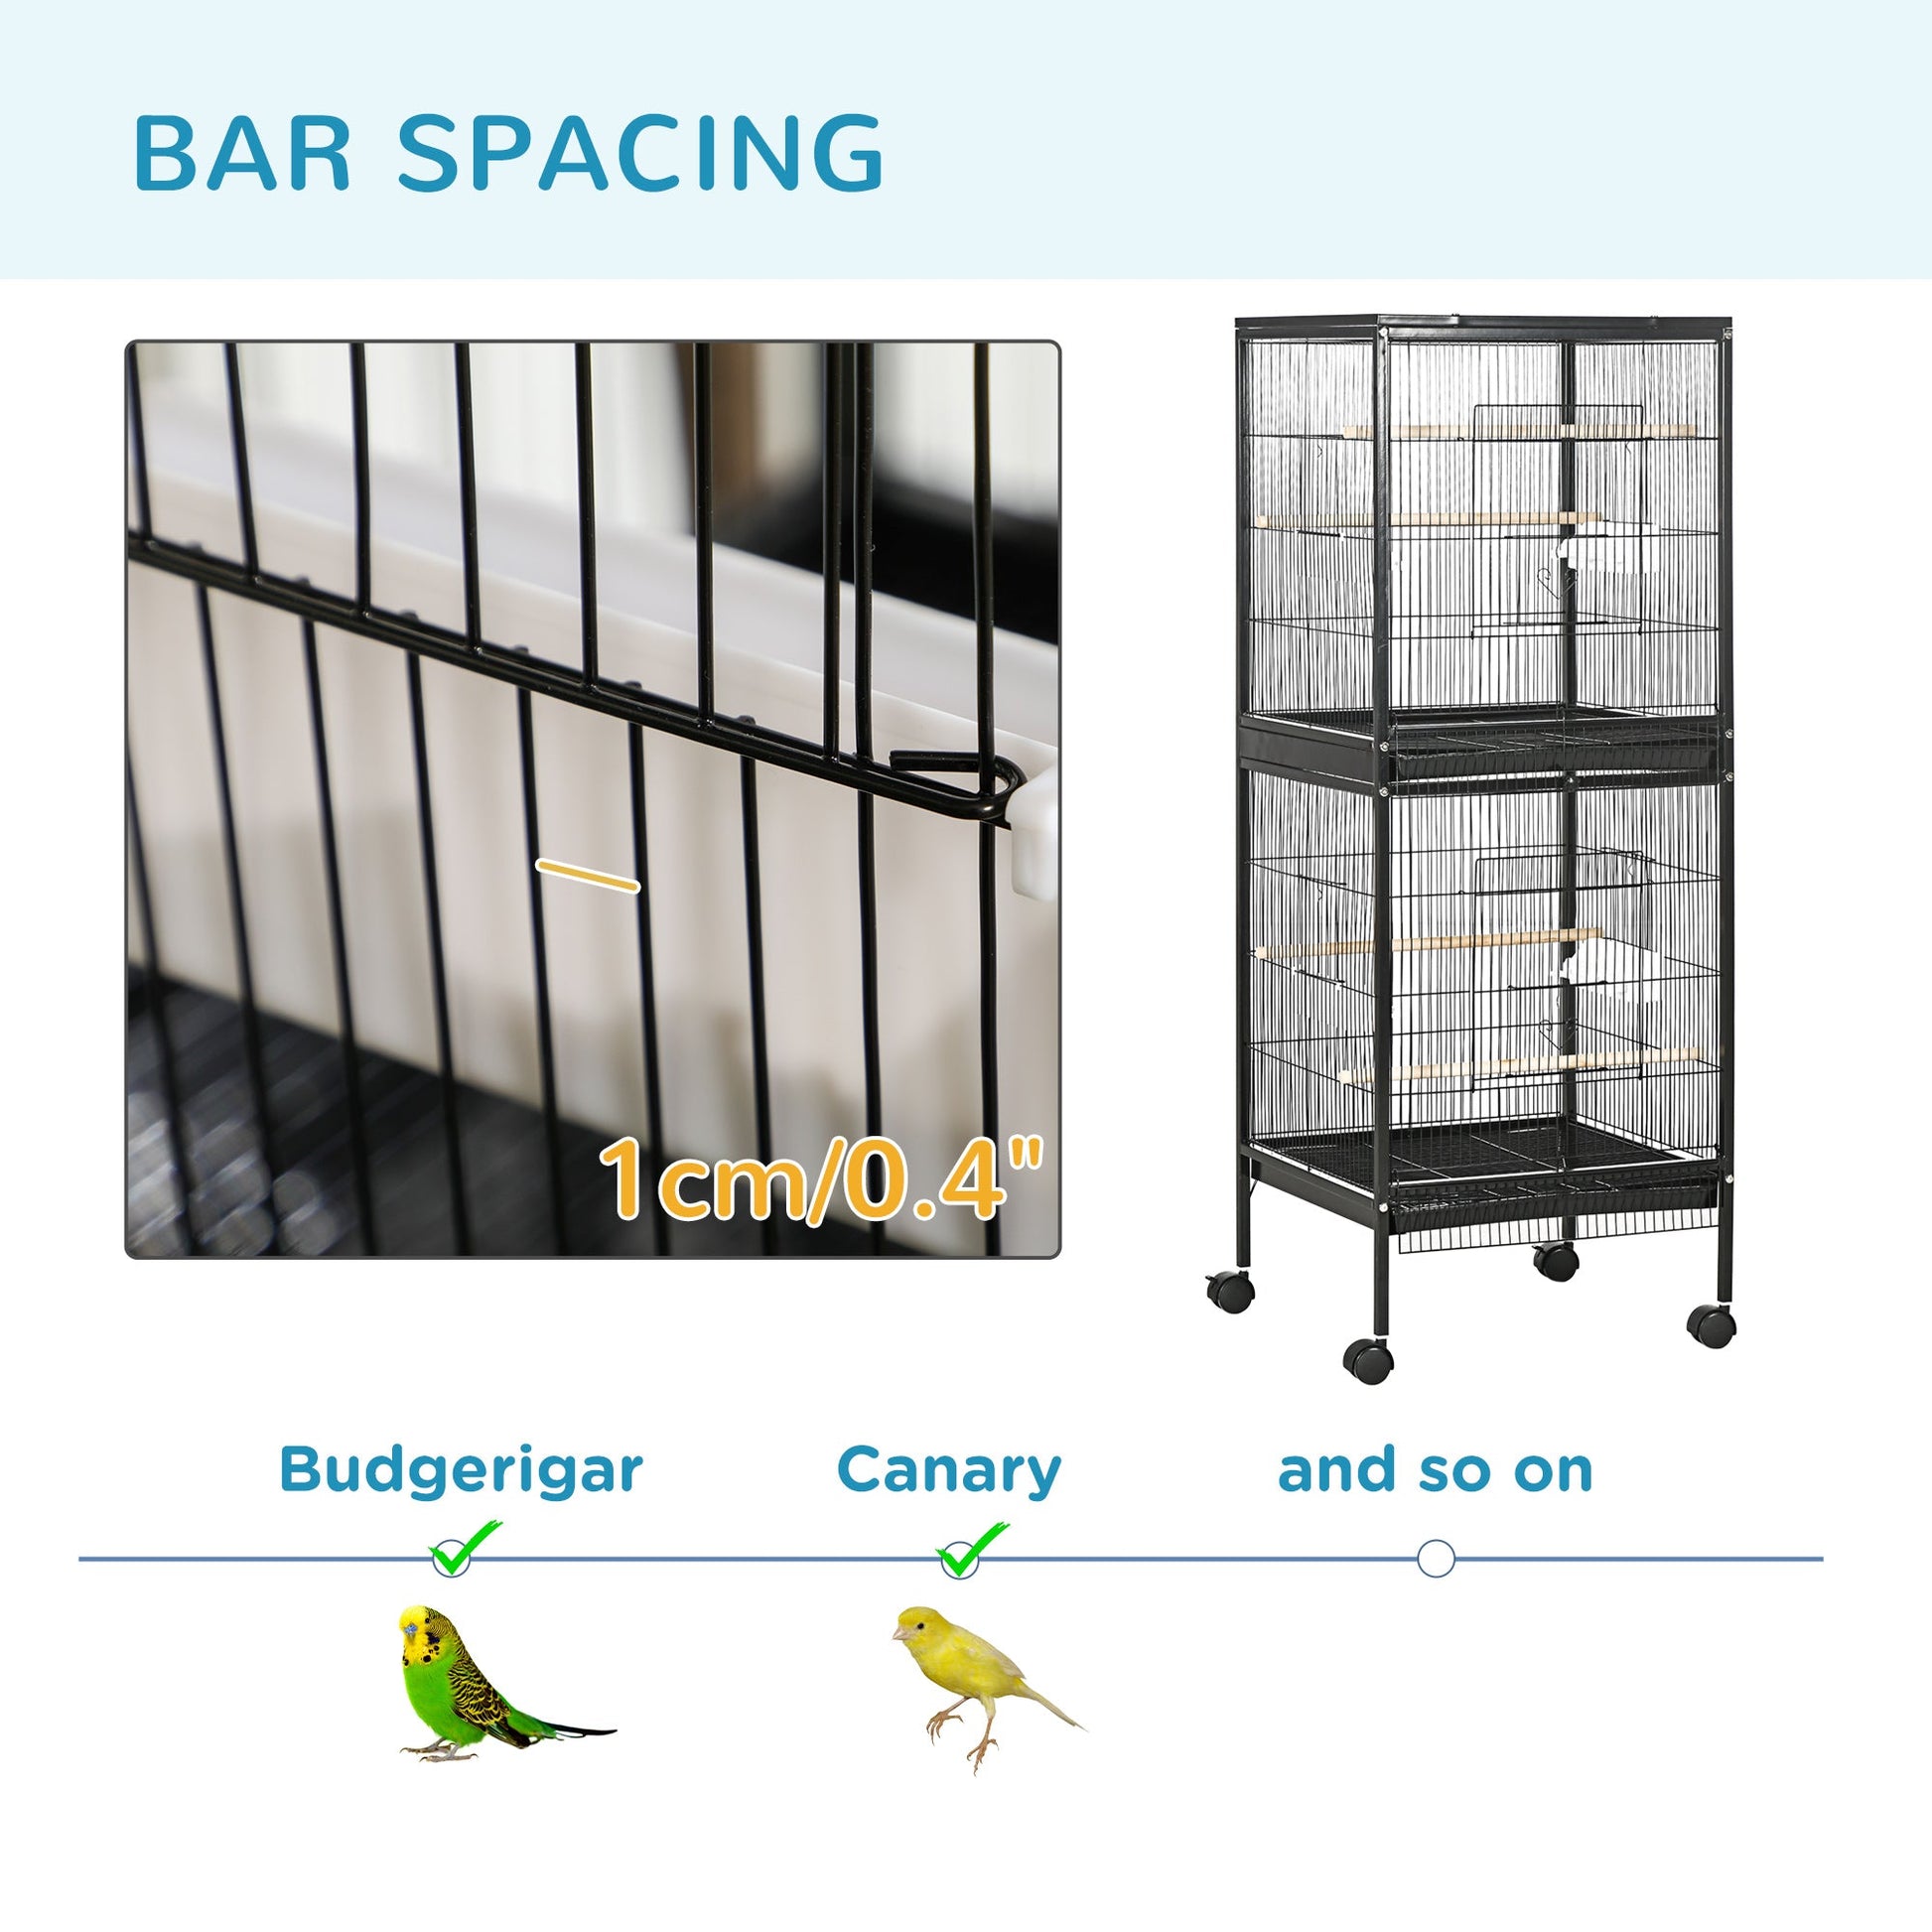 55.1" 2 In 1 Bird Cage Aviary Parakeet House for finches, budgies with Wheels, Slide-out Trays, Wood Perch, Food Containers, Black at Gallery Canada